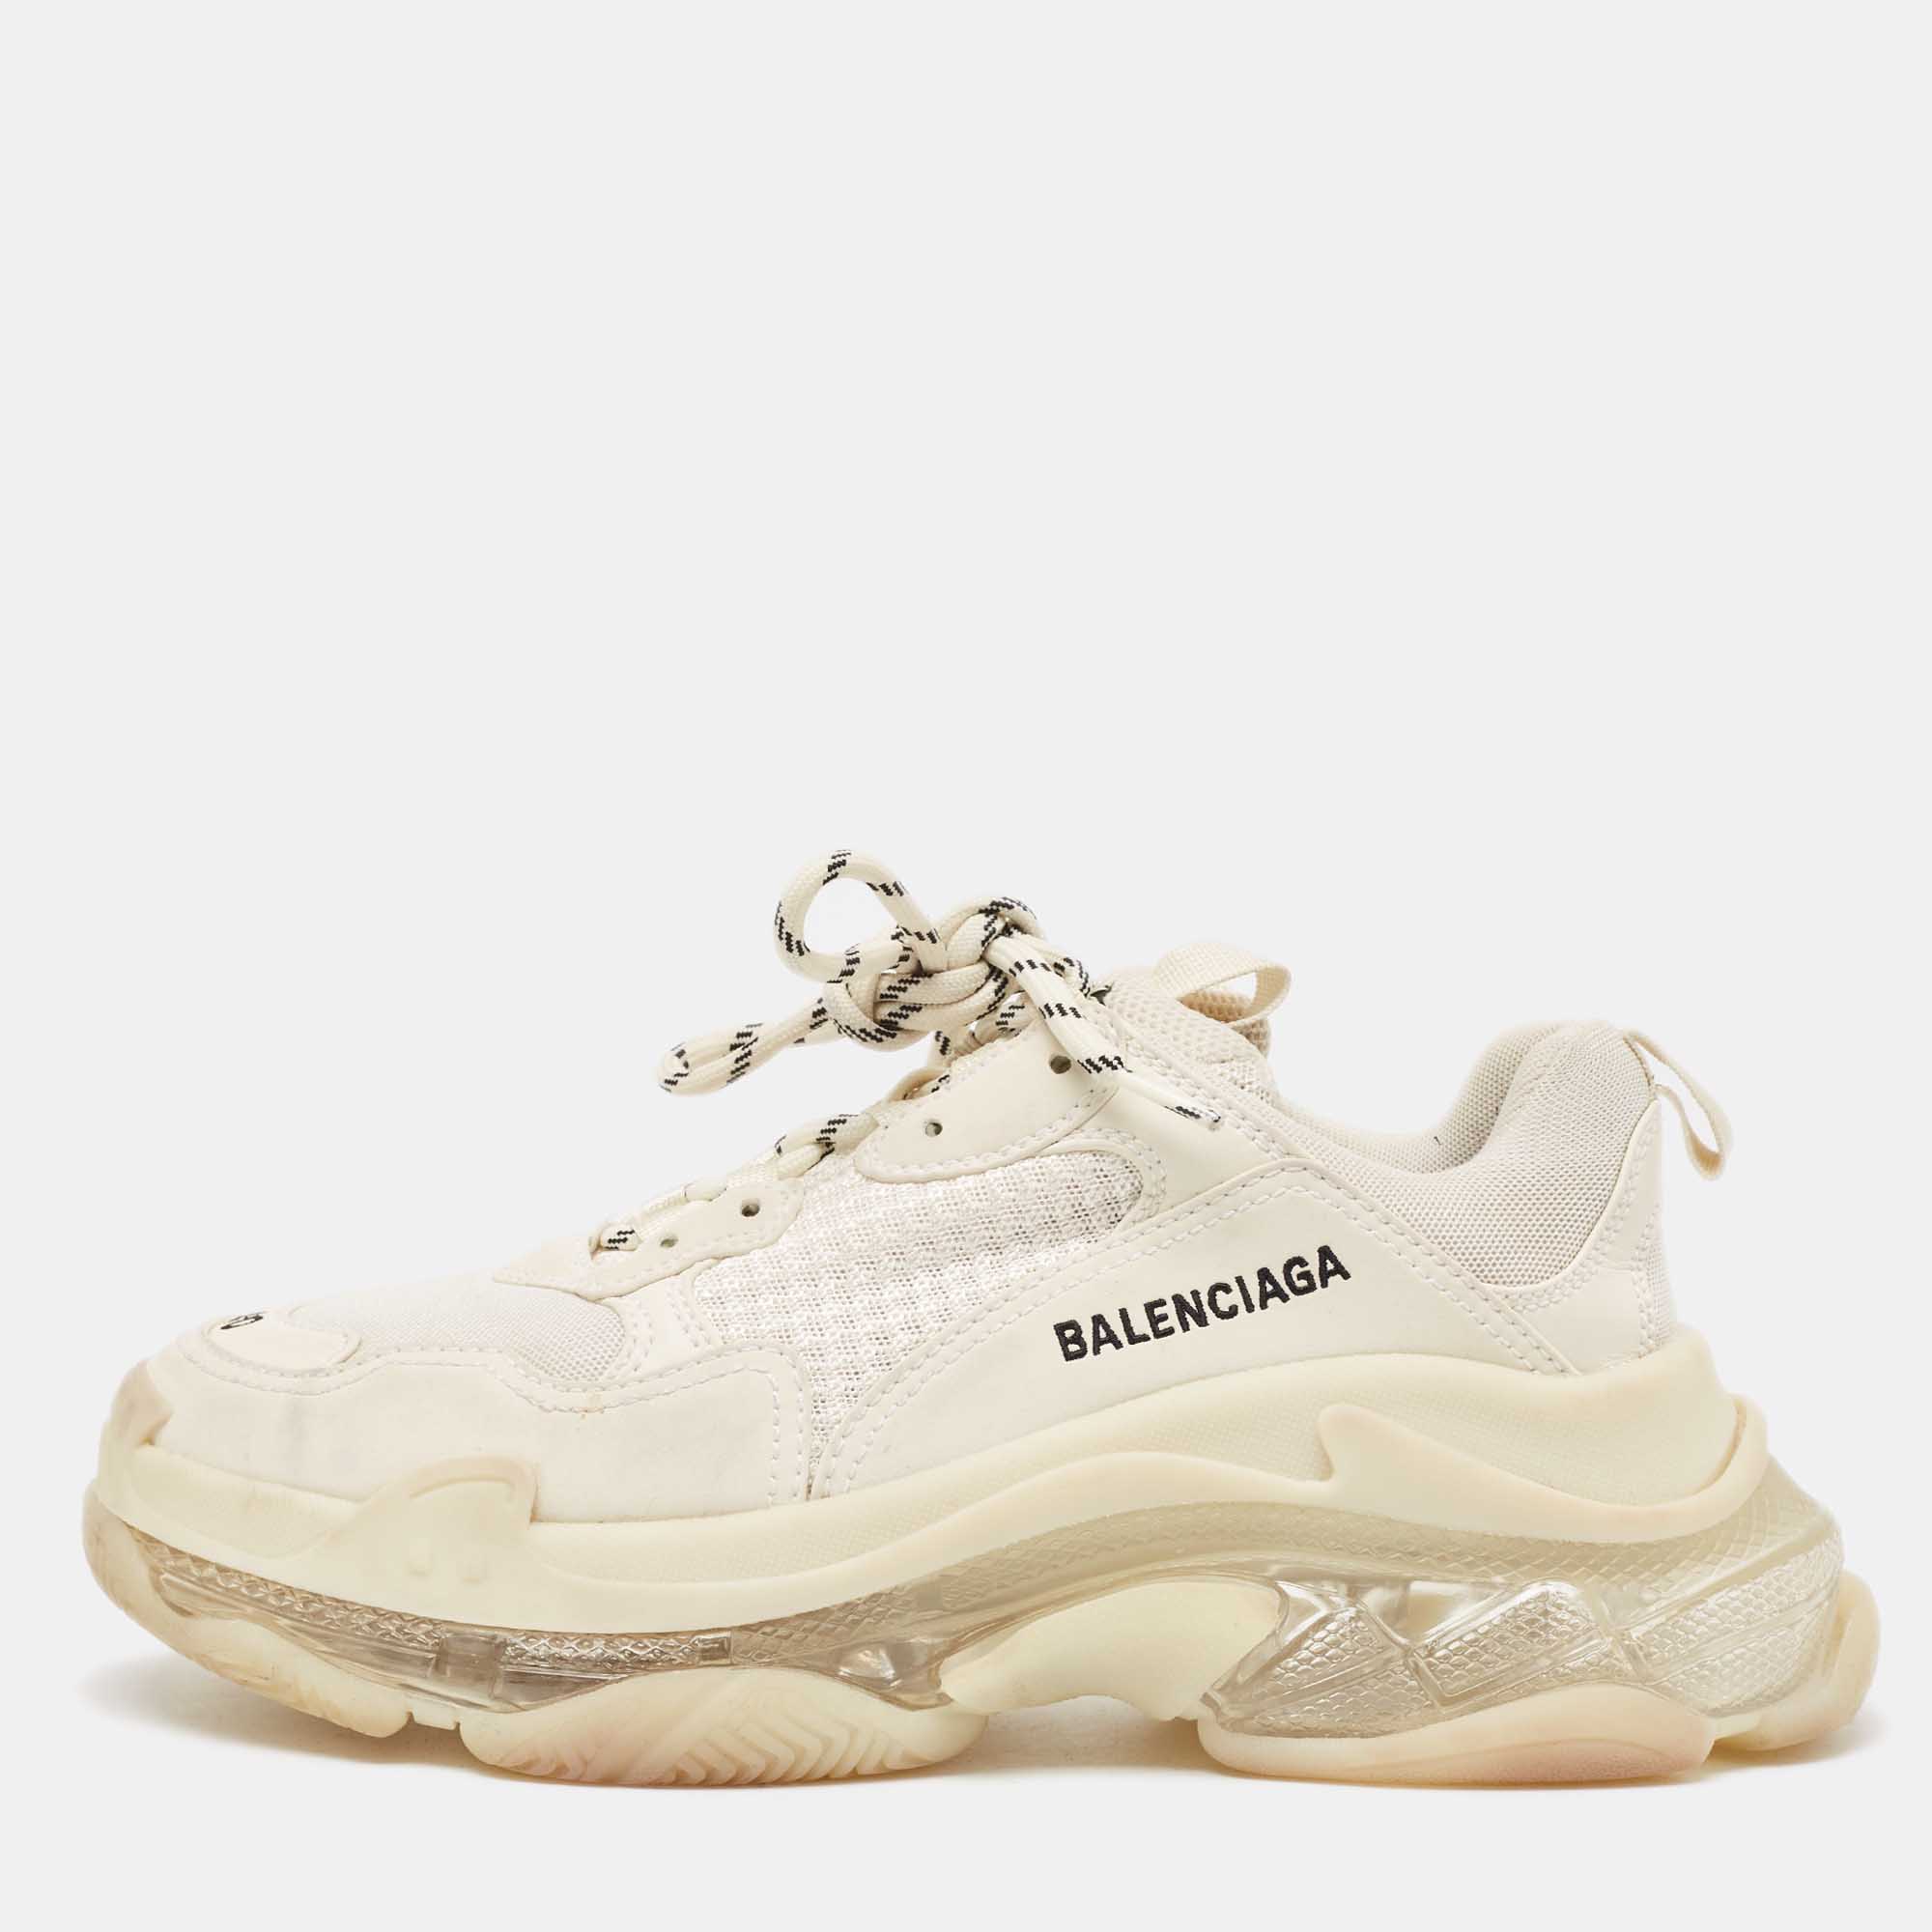 

Balenciaga White/Grey Nubuck Leather and Mesh Triple S Clear Sneakers Size